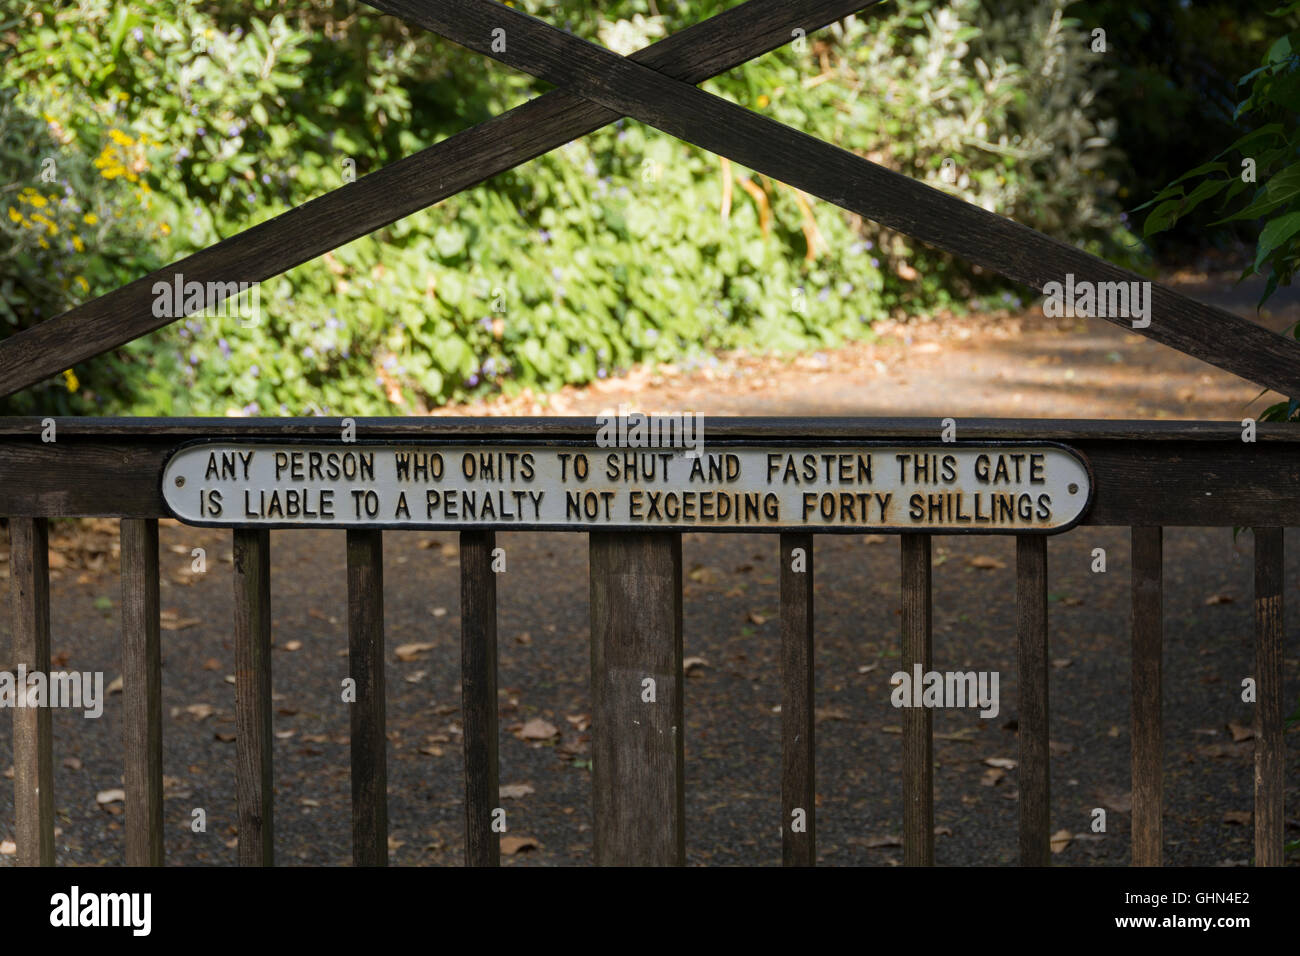 Gate at Lelant in Cornwall with interesting sign for walkers- shut the gate or face a penalty Stock Photo